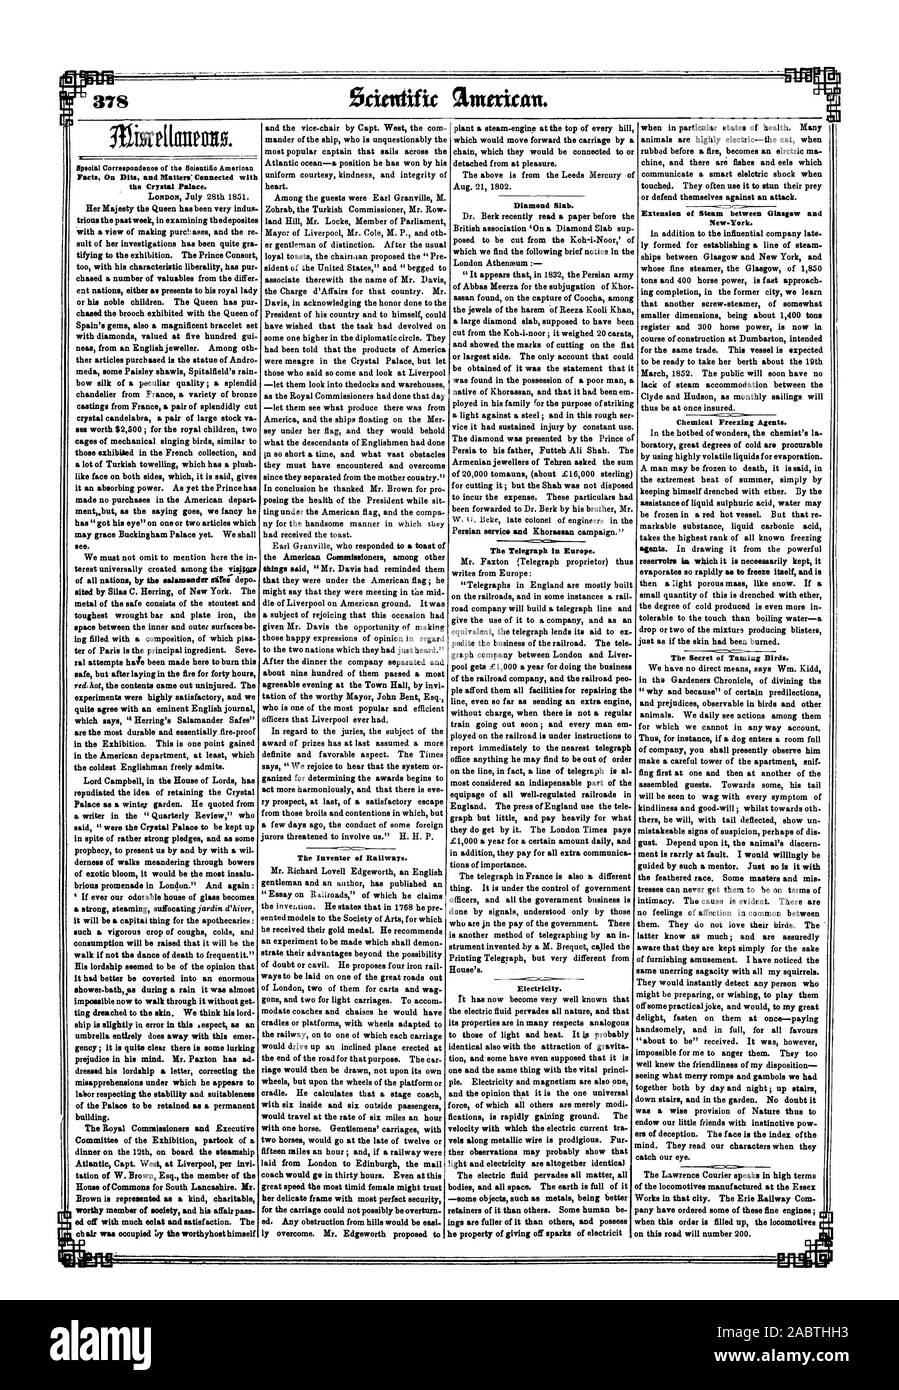 mind. They read our characters when they catch our eye. The Lawrence Courier speaks in high terms of the locomotives manufactured at the Essex Works in that city. The Erie Railway Com pany have ordered some of these fine engines ; when this order is filled up the locomotives on this road will number 200., scientific american, 1851-08-16 Stock Photo